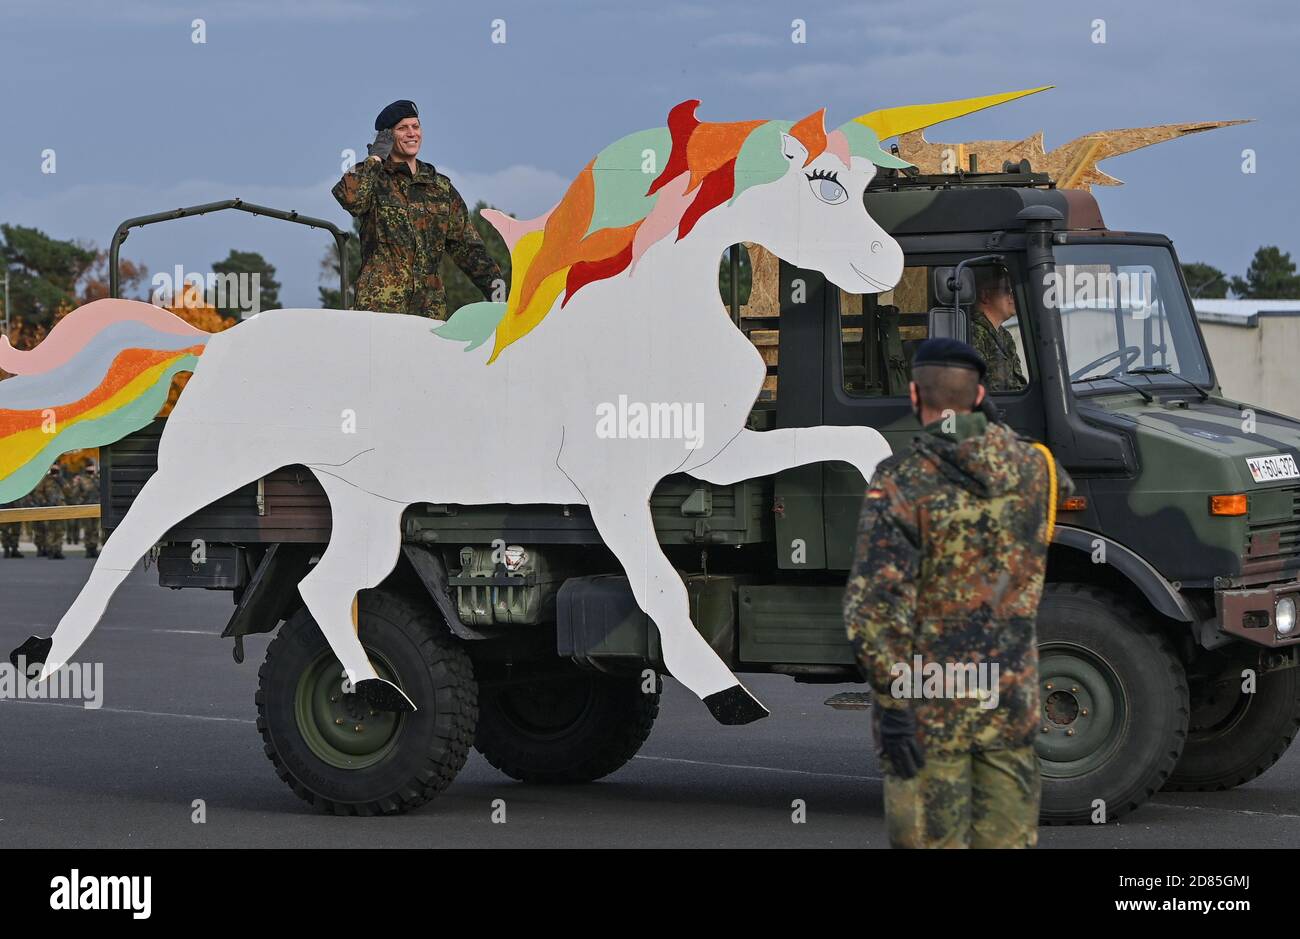 27 October 2020, Brandenburg, Storkow: Anastasia Biefang, commander of the  Information Technology Battalion 381 and first transgender commander of the  German Armed Forces, drives on a truck with a large unicorn made